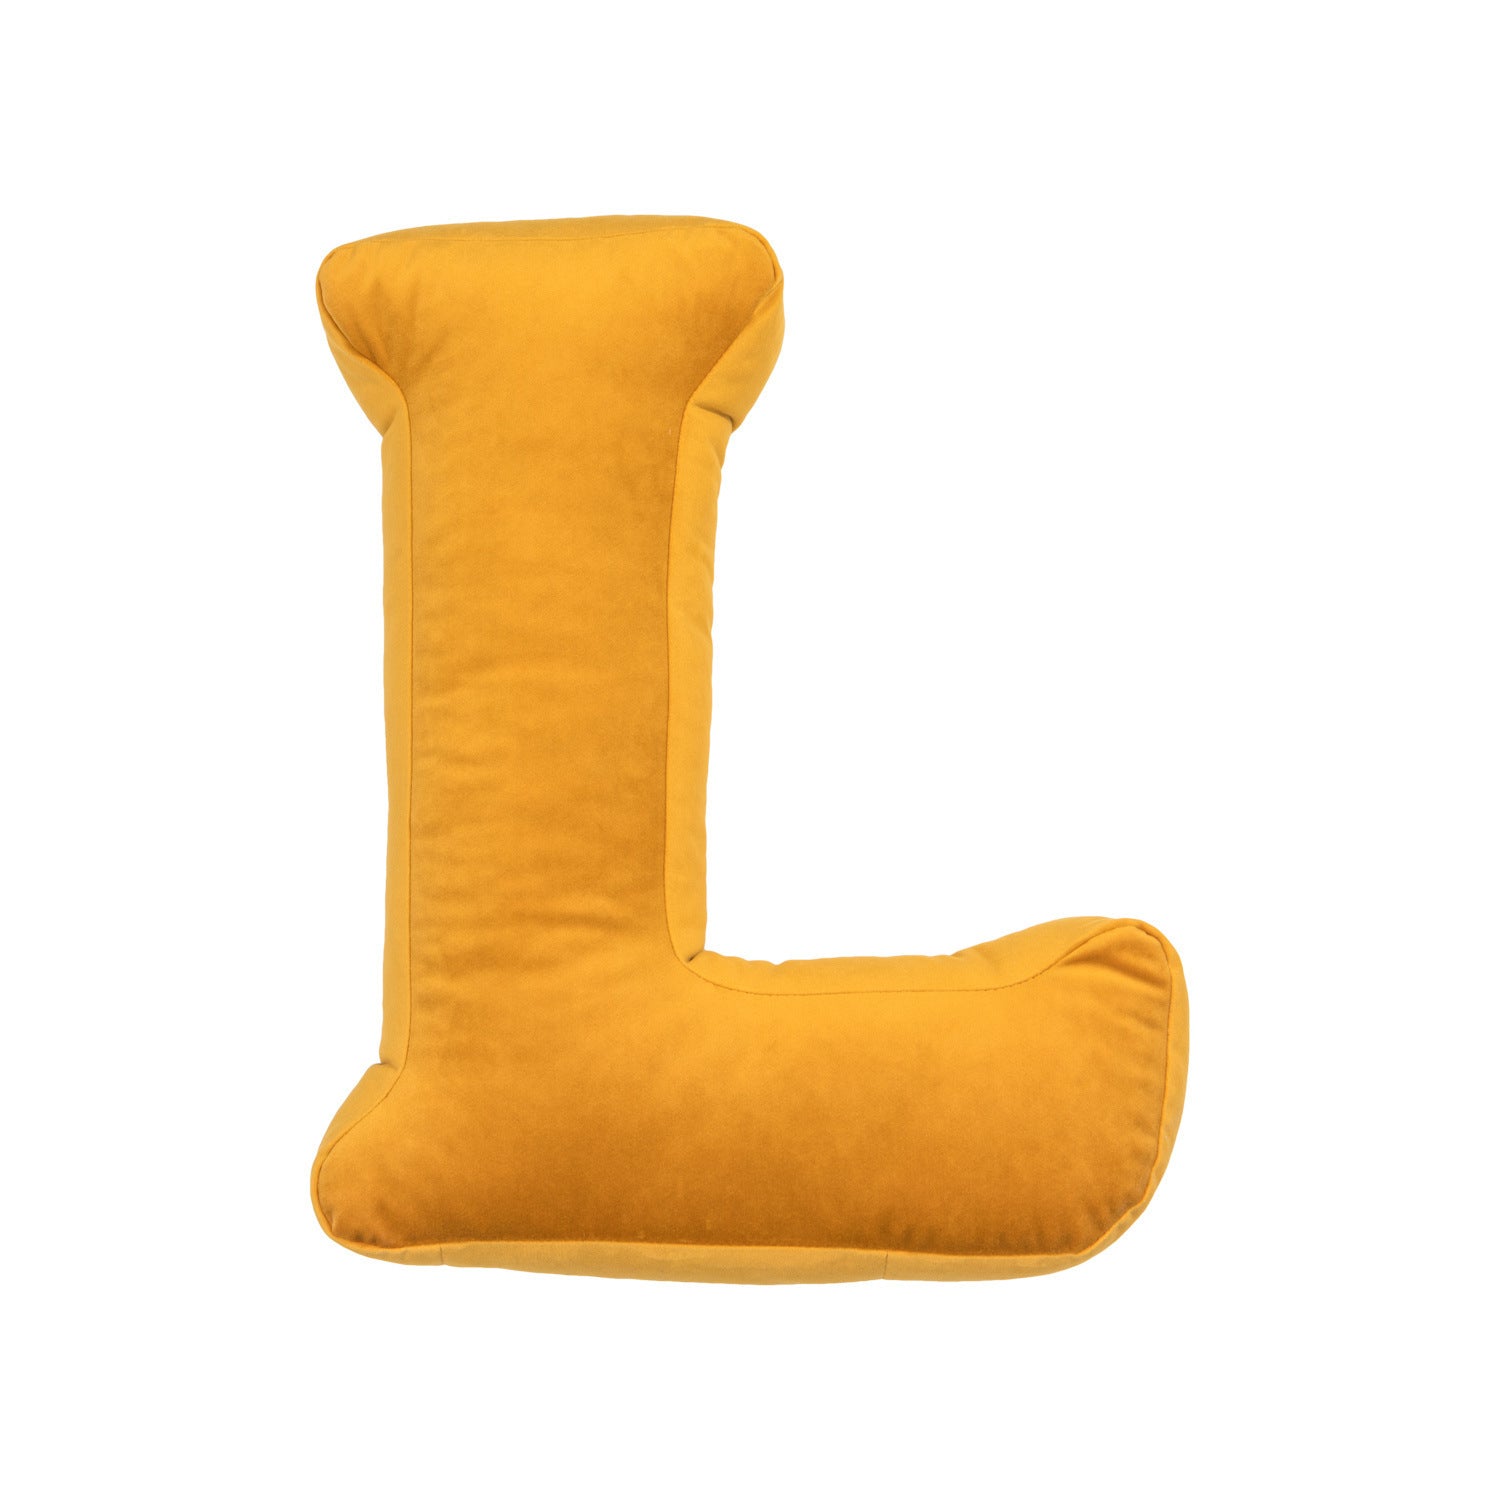 ABC - letters of the Alphabet - Pillows